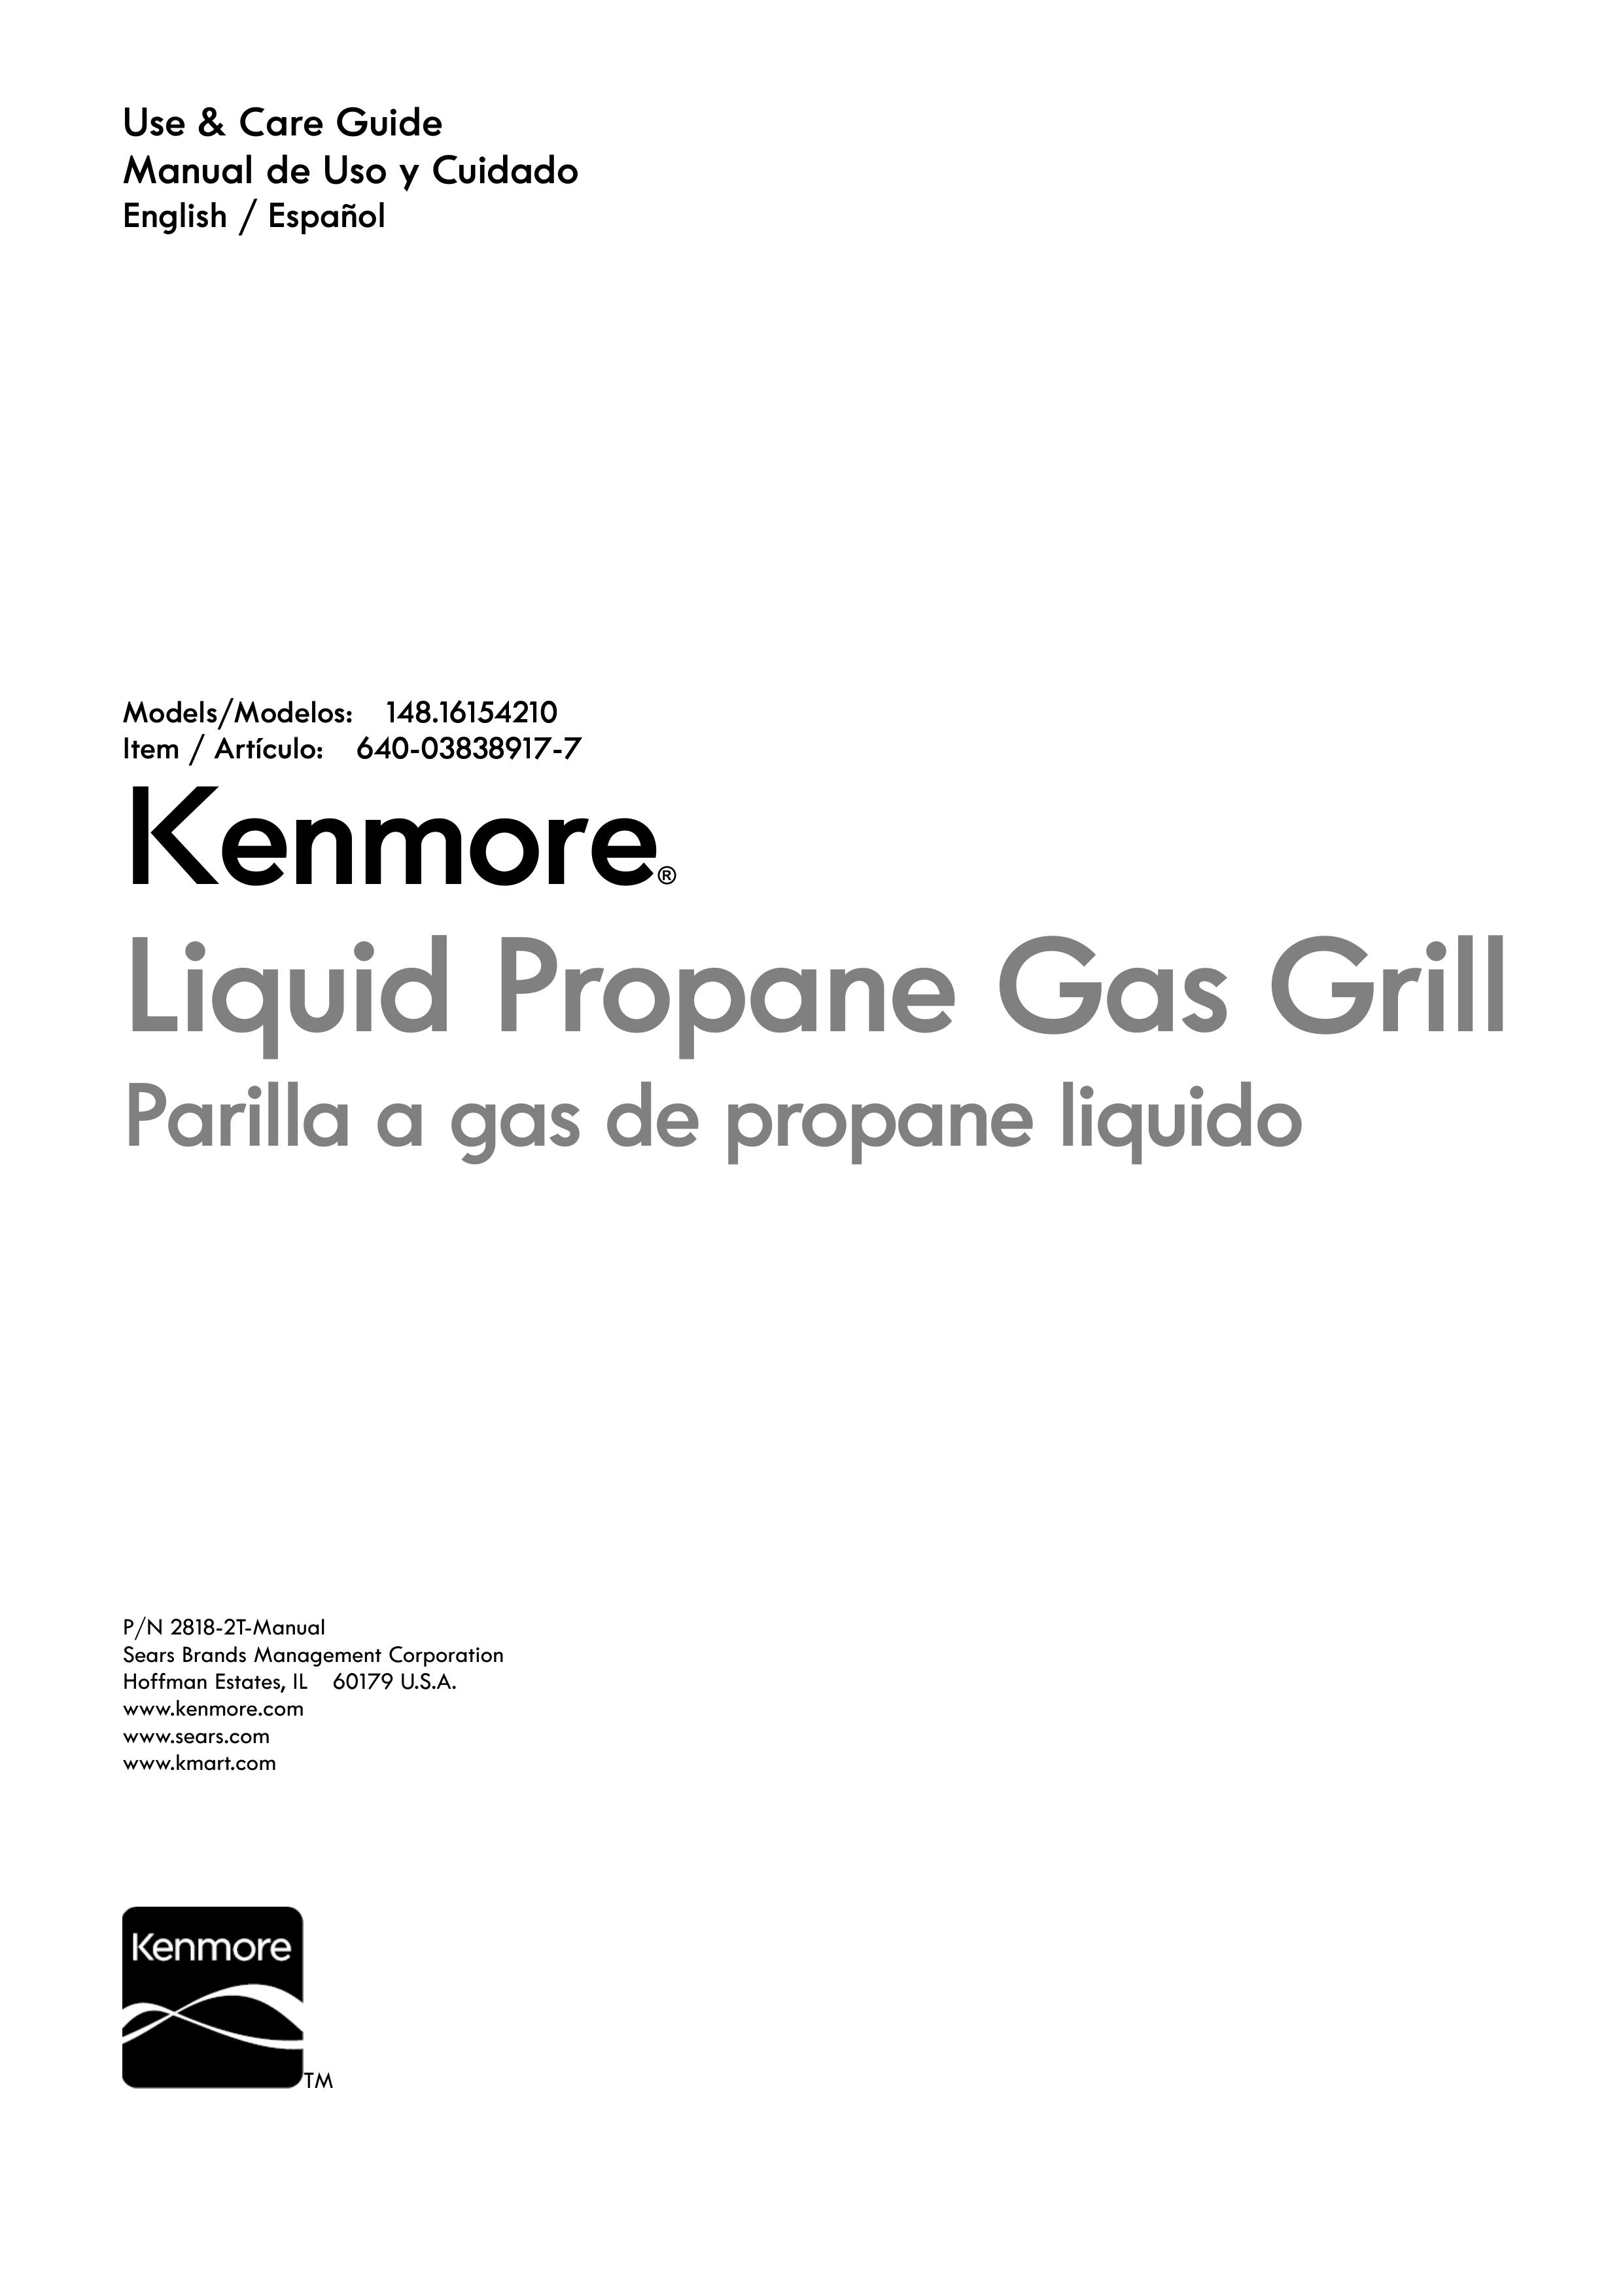 Kenmore 148.1615421 Gas Grill User Manual